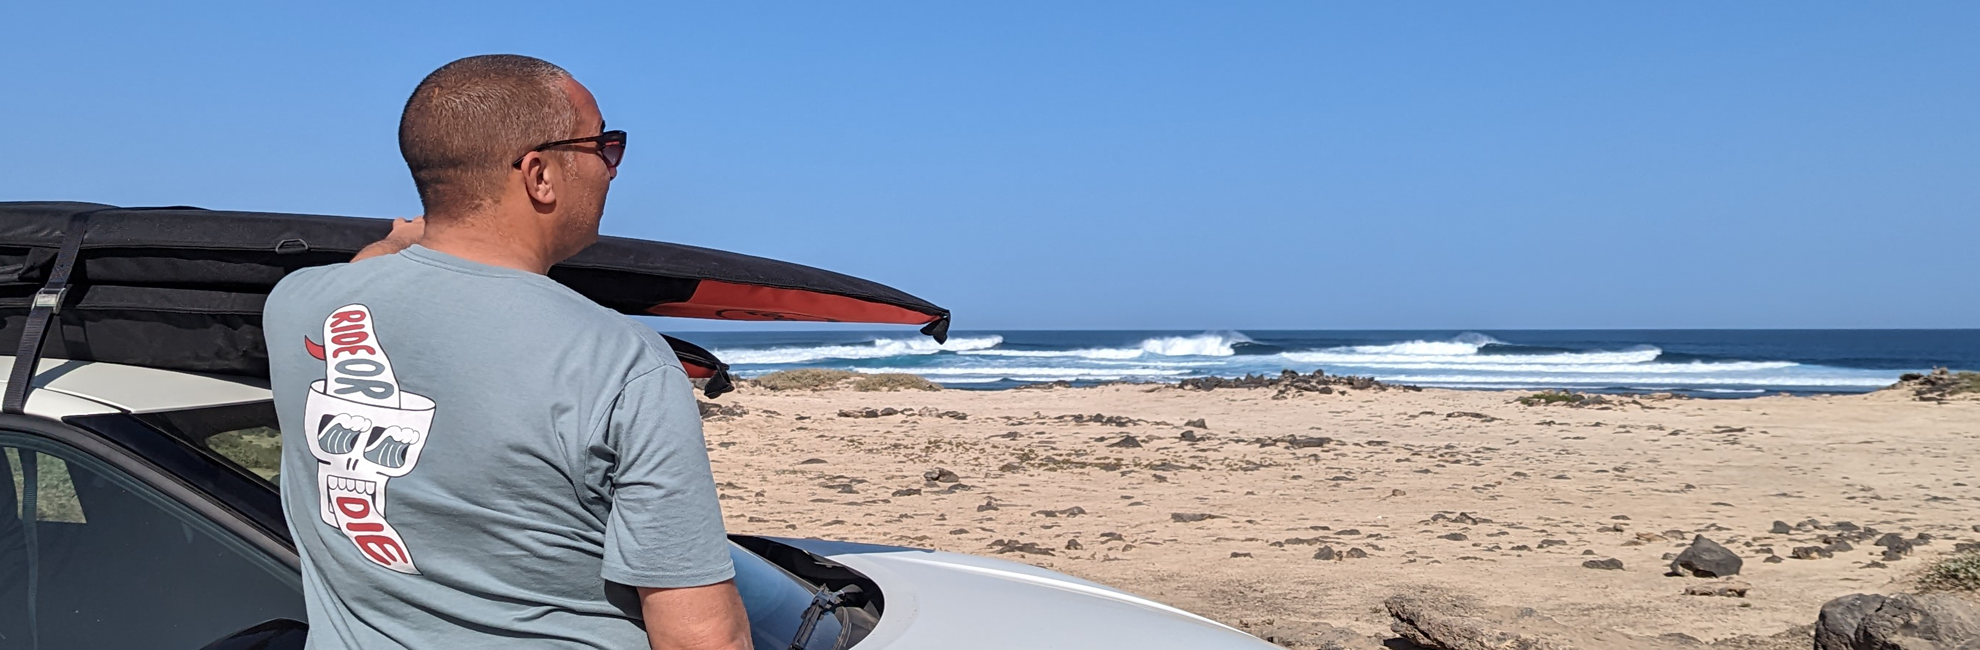 Loco Kids SUPs - guy looking out at waves in Fuerteventura with SUP on roof